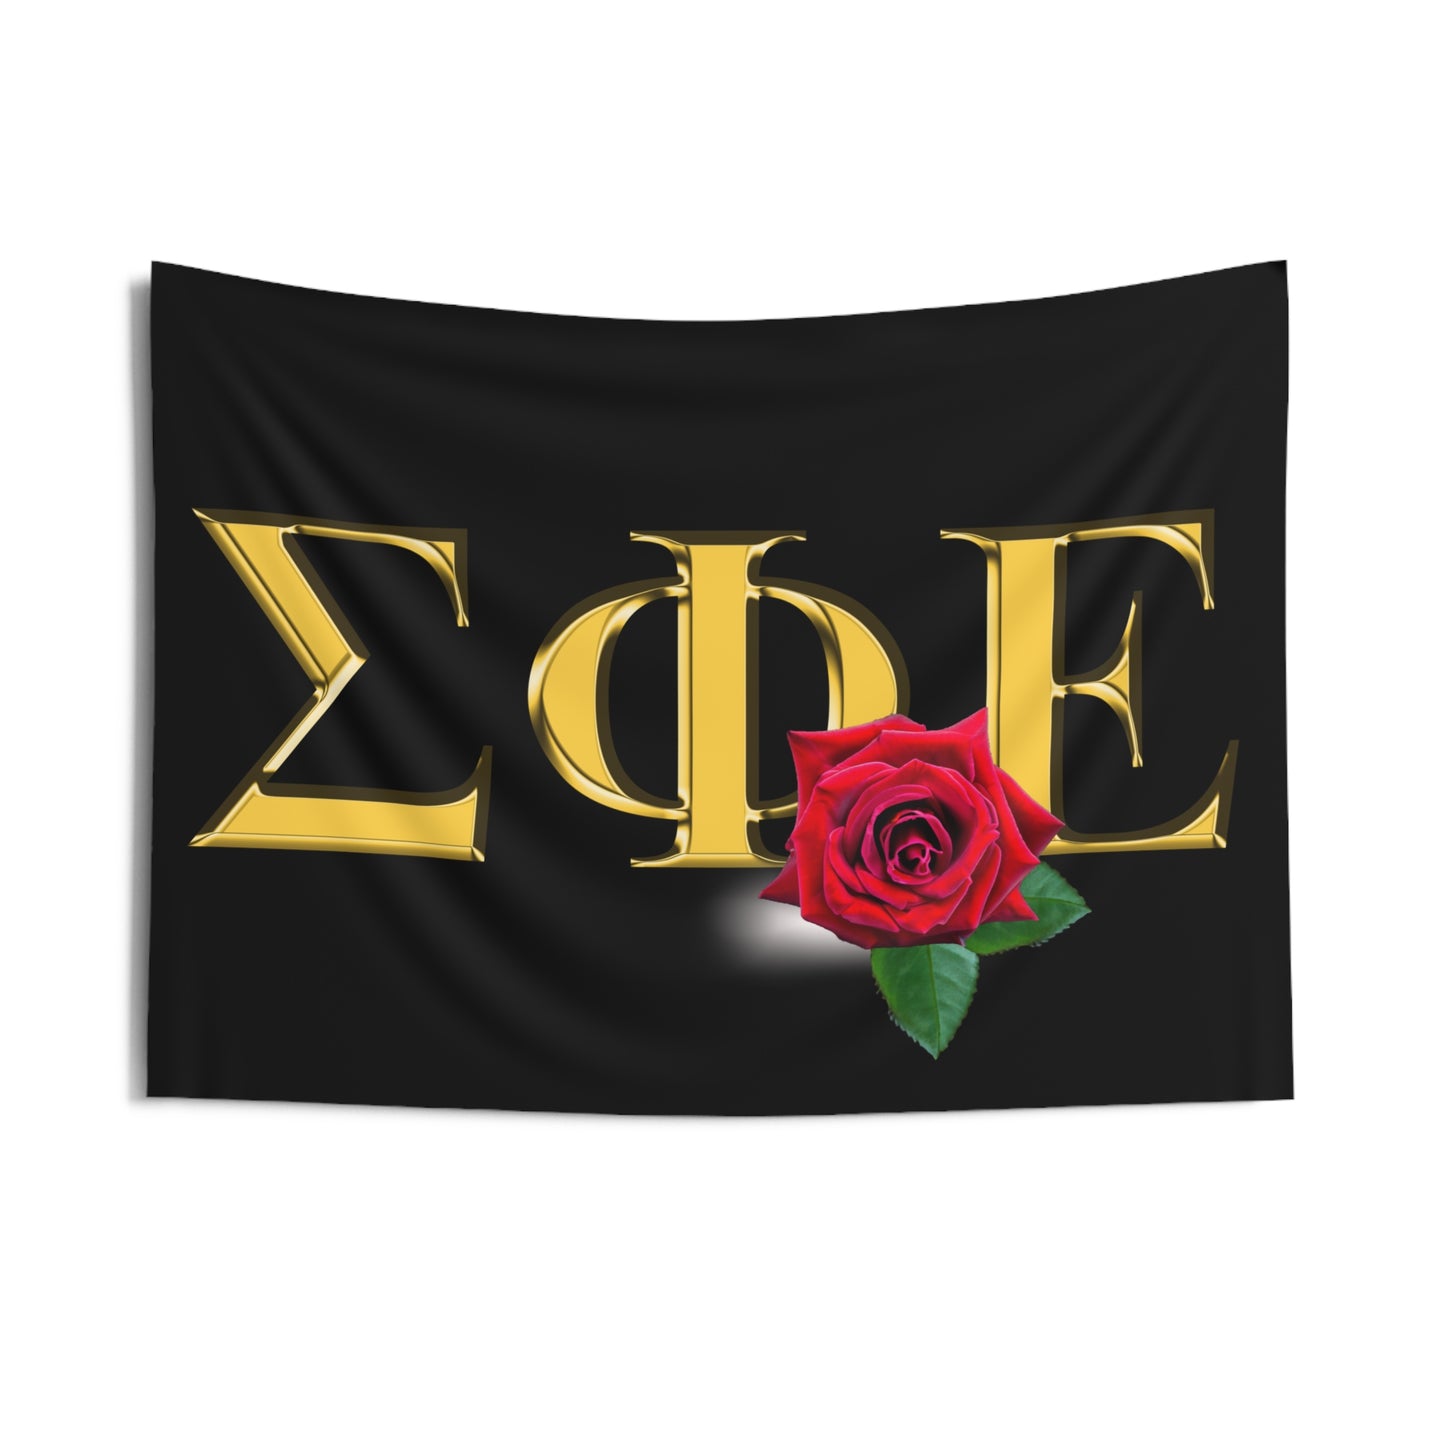 Sigma Phi Epsilon Wall Flag with Gold Letters Fraternity Home Decoration for Dorms & Apartments